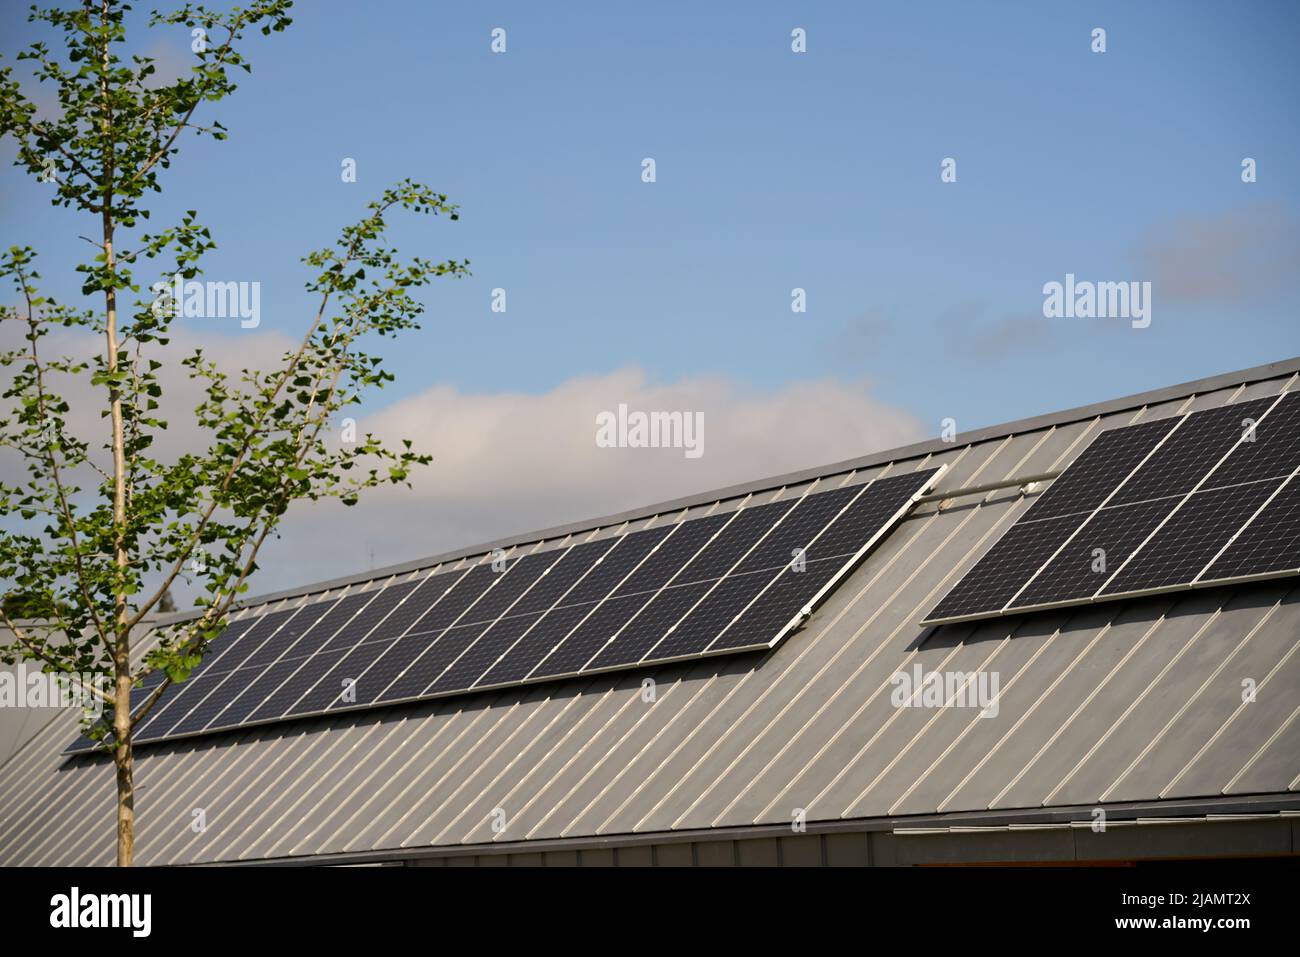 State-of-the-art solar panels placed on the roofs of houses of ecological construction Stock Photo